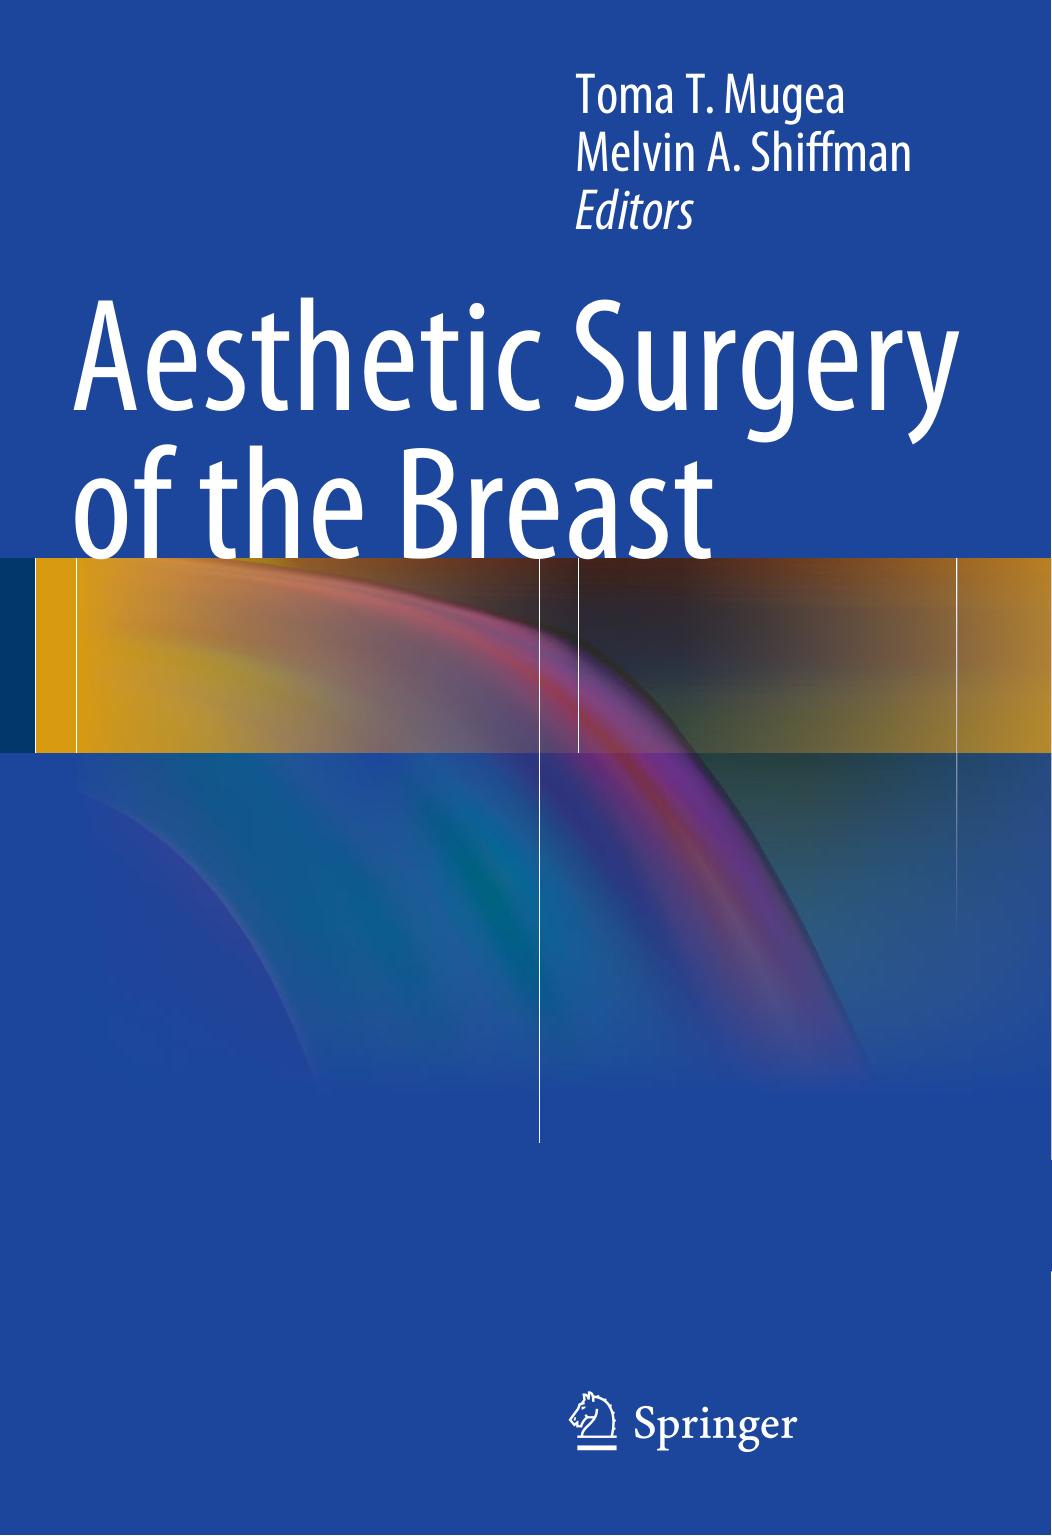 Aesthetic Surgery of the Breast ( PDFDrive.com )